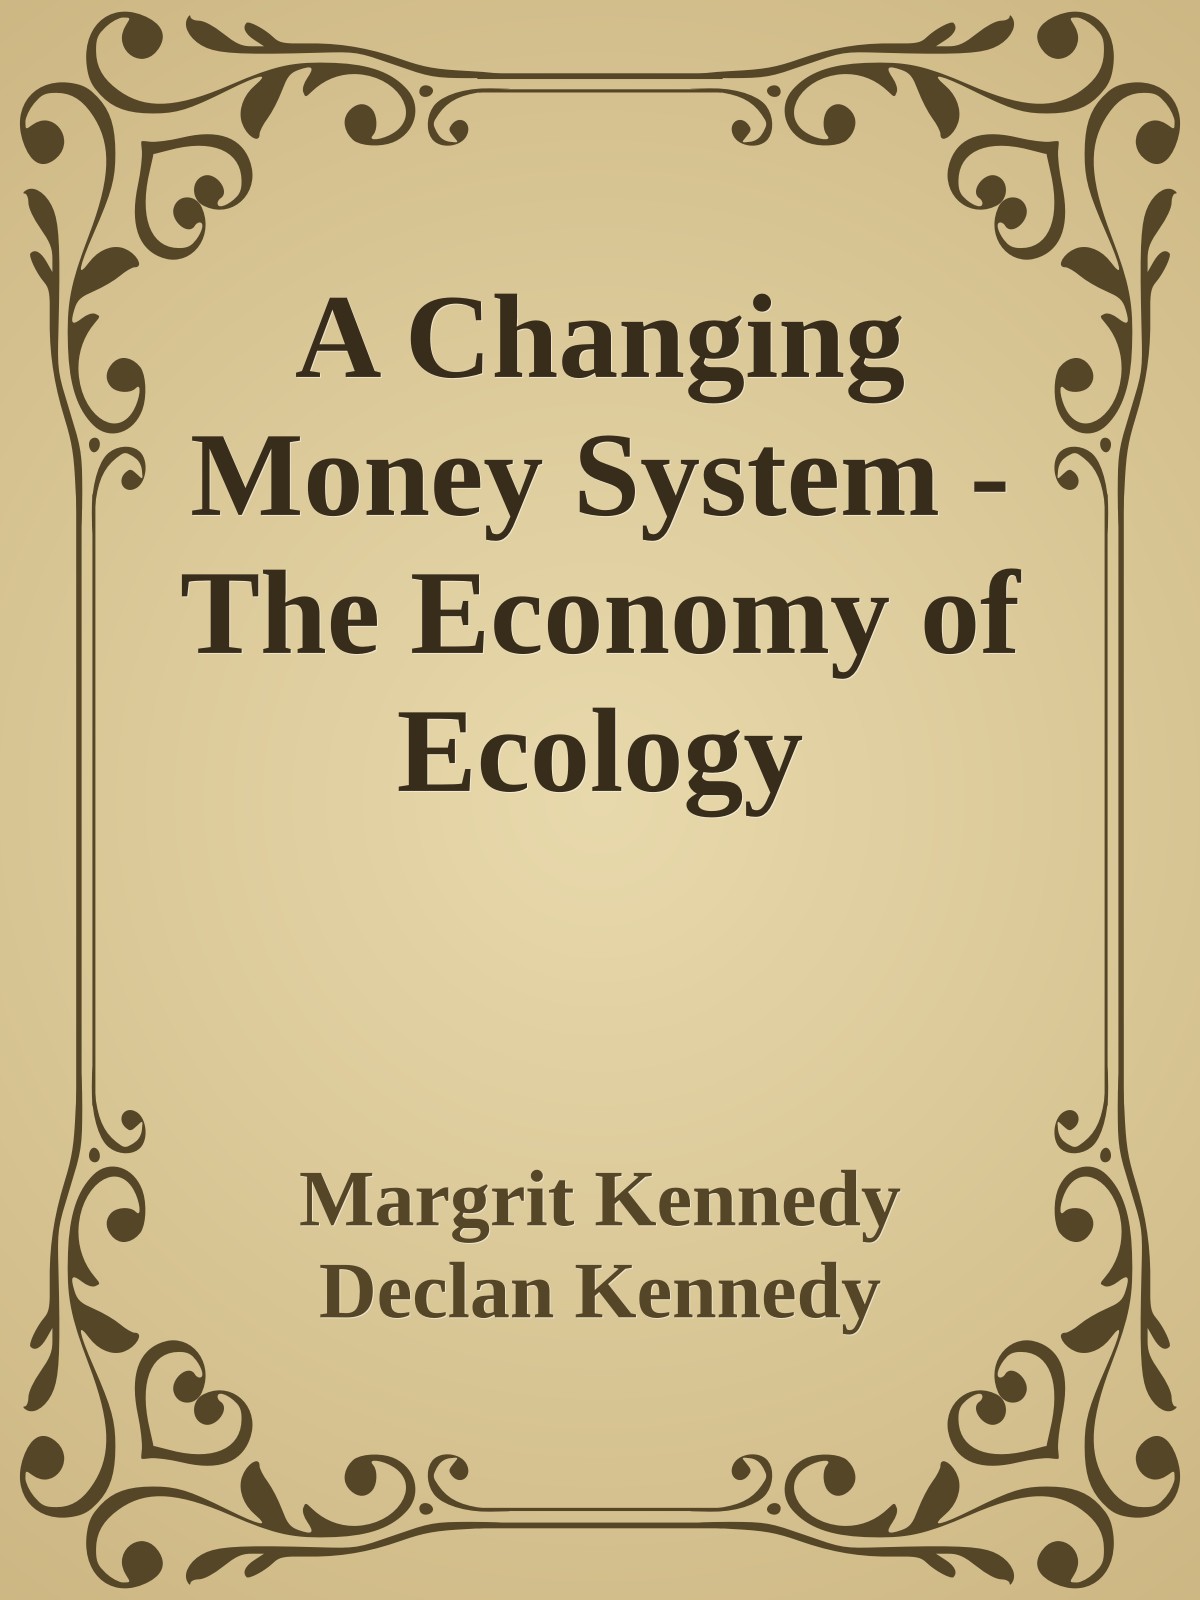 A Changing Money System - The Economy of Ecology (1991) by Margrit Kennedy